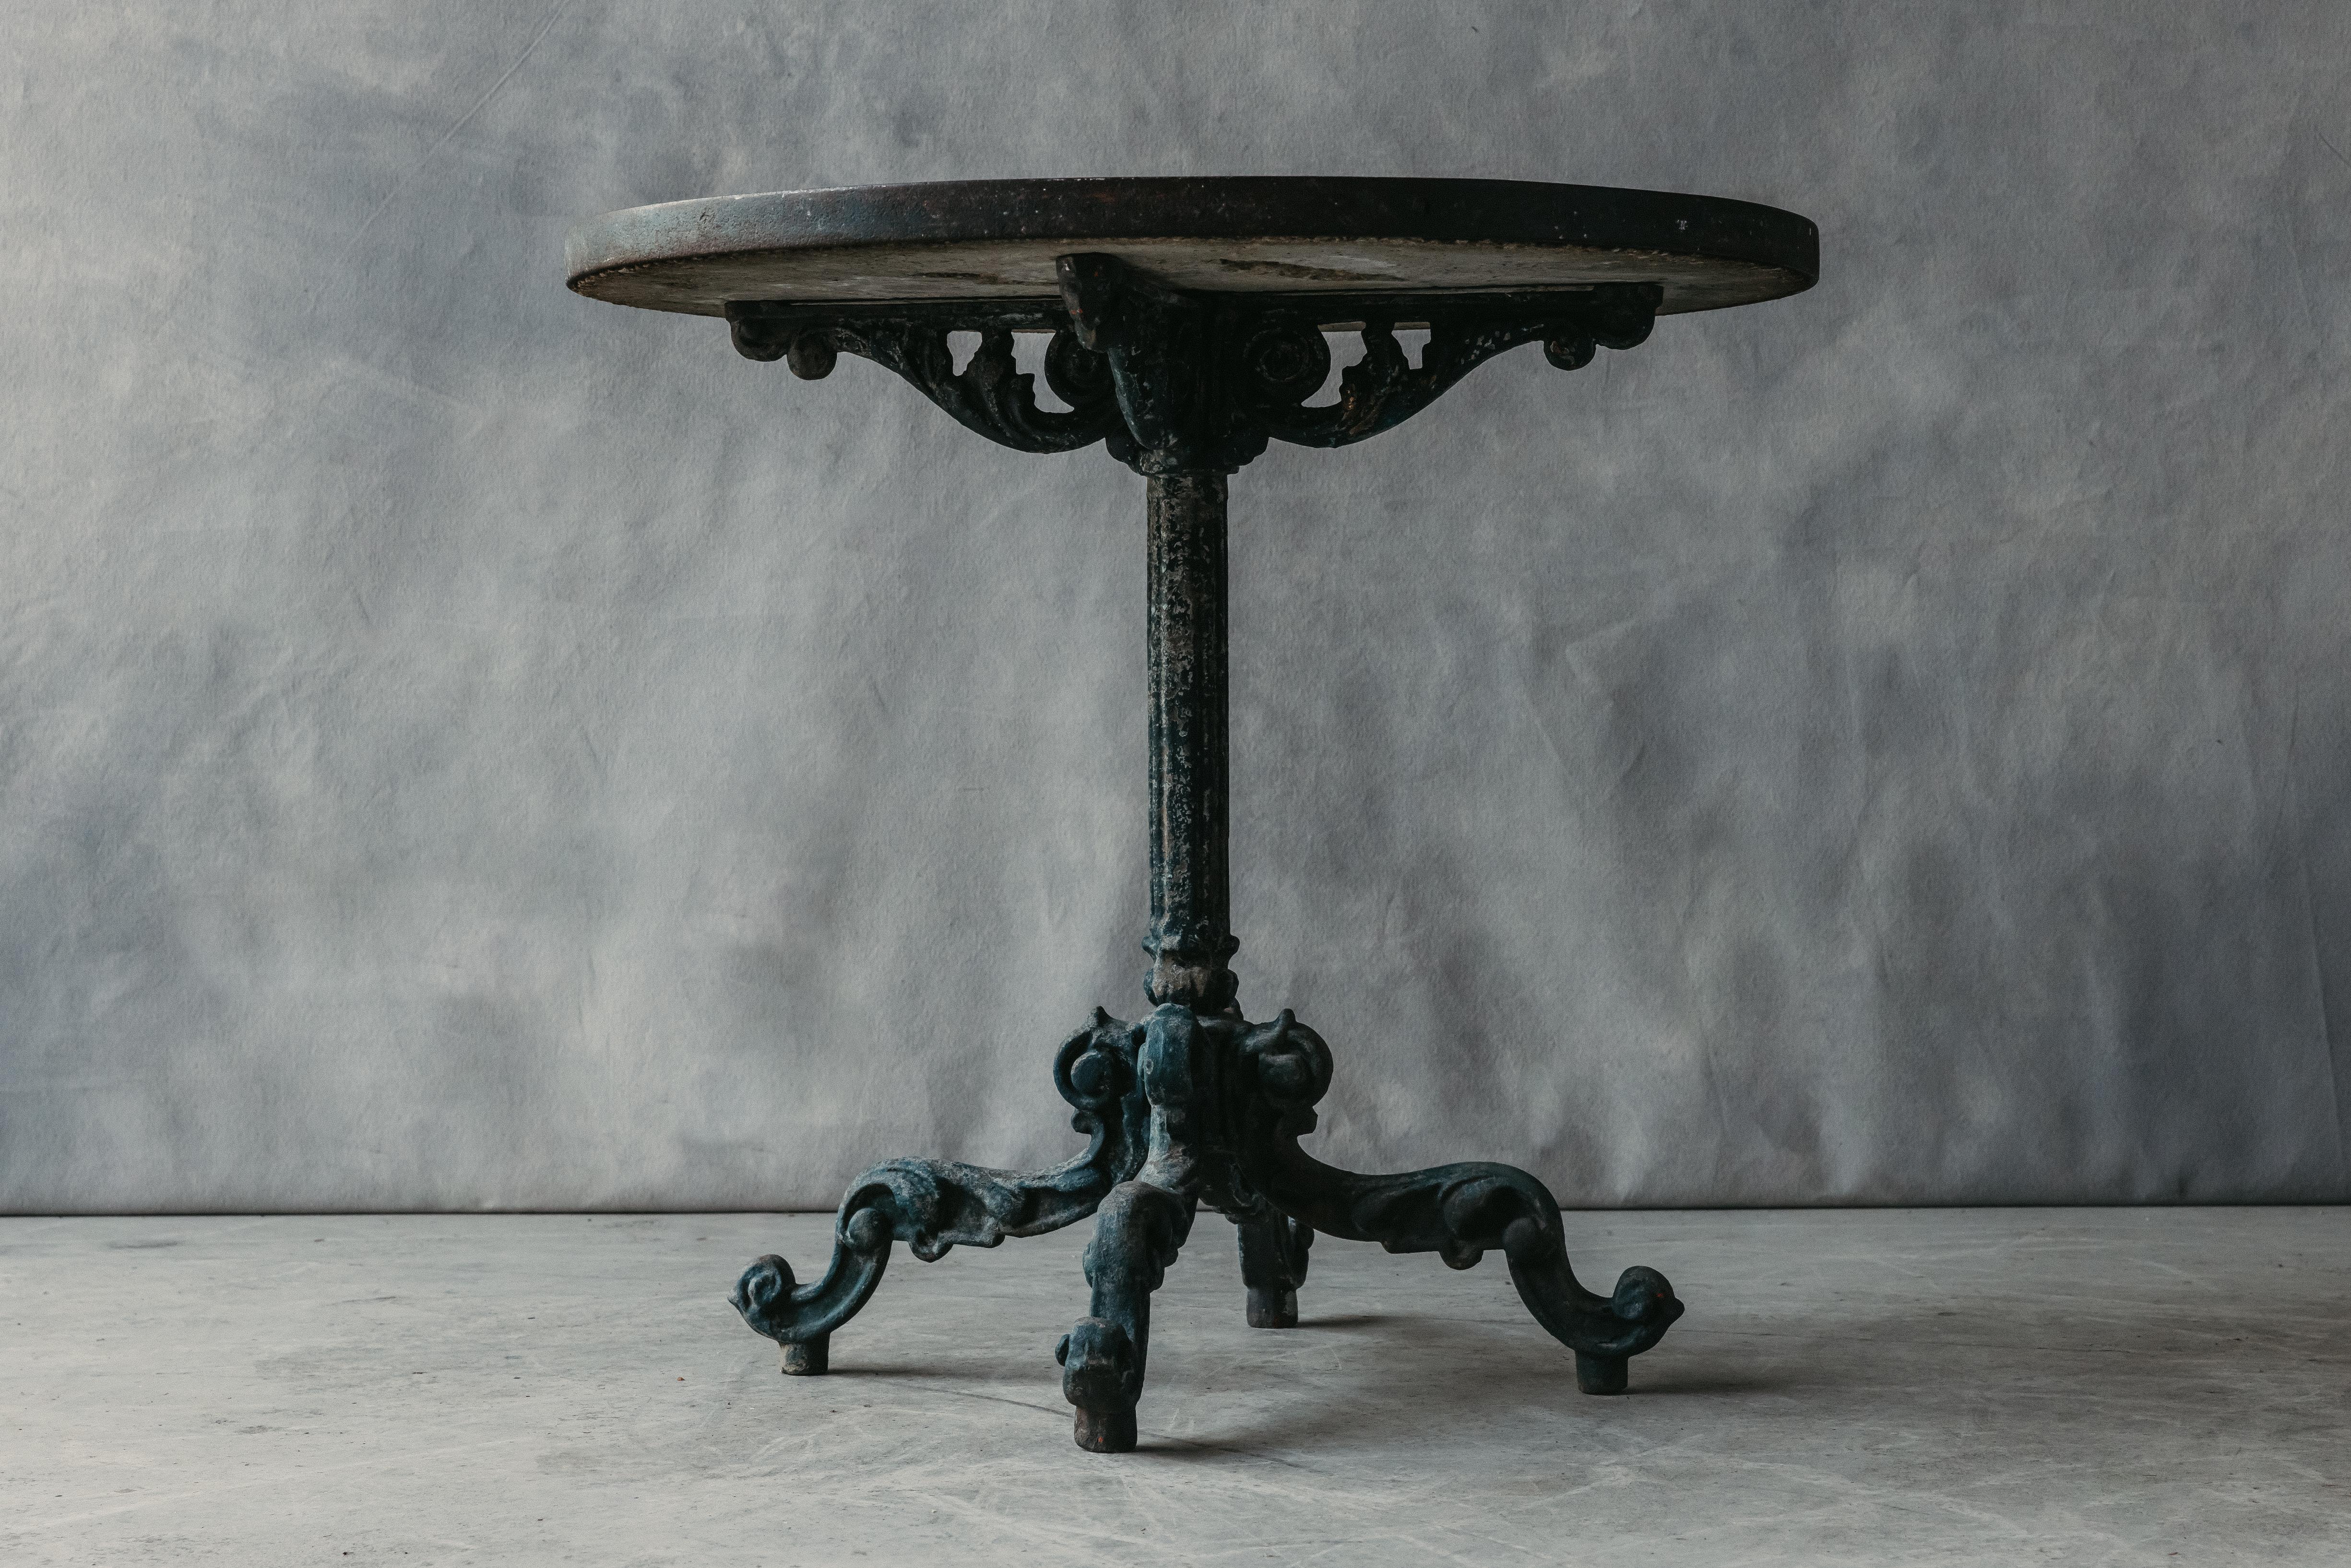 Early Cast Iron Garden Table From France, Circa 1930.  Solid cast iron base with fantastic detail and original color.  Concrete top with inlaid rock detail and mosaic style.